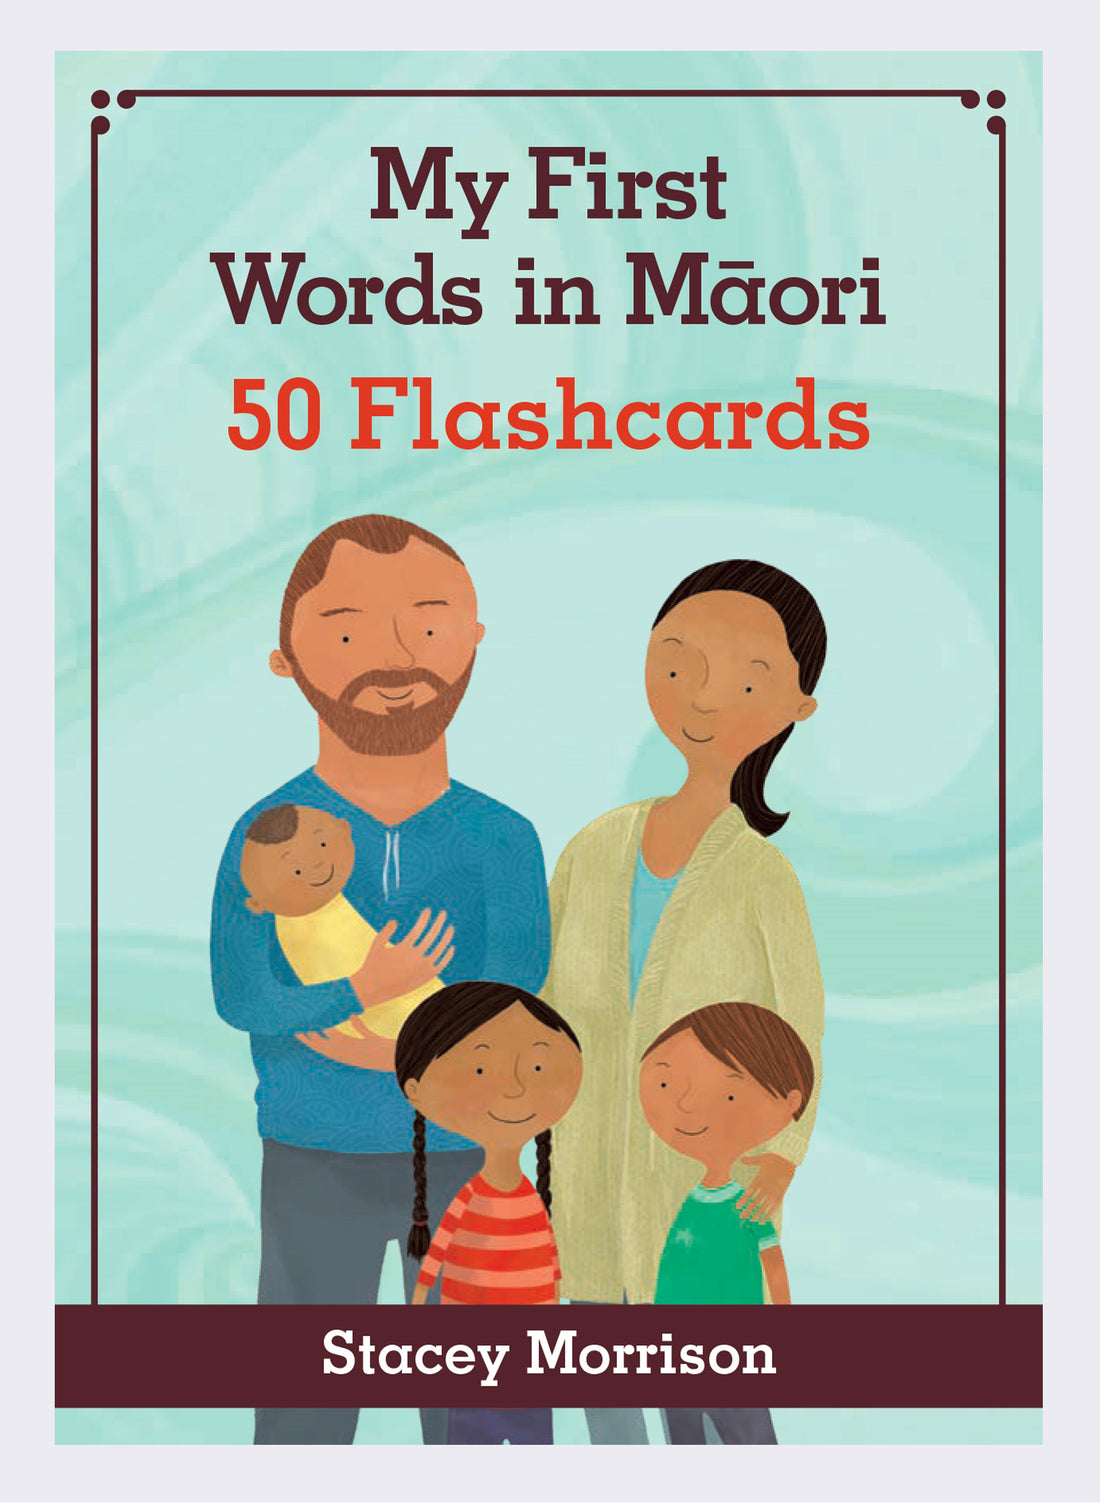 My First Words In Māori - (Flash Cards)